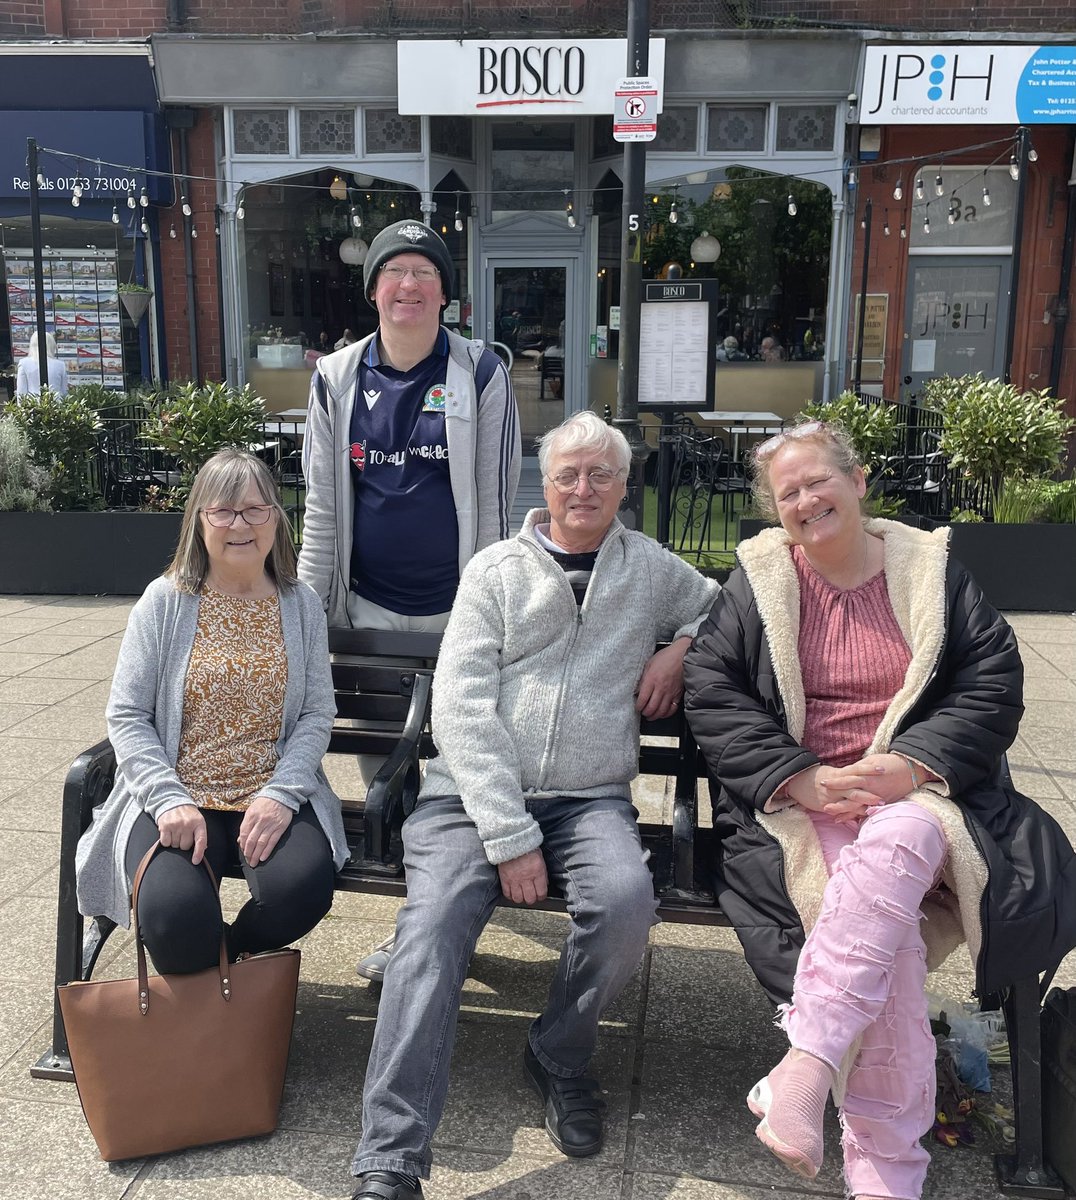 We had a trip out to Lytham last week with the Blackburn schemes @placesforpeople . We went to Lowther Gardens, where we had lunch and then had a walk through the park. And then into town to do a bit off shopping, everyone enjoyed their time looking through all the charity shops.